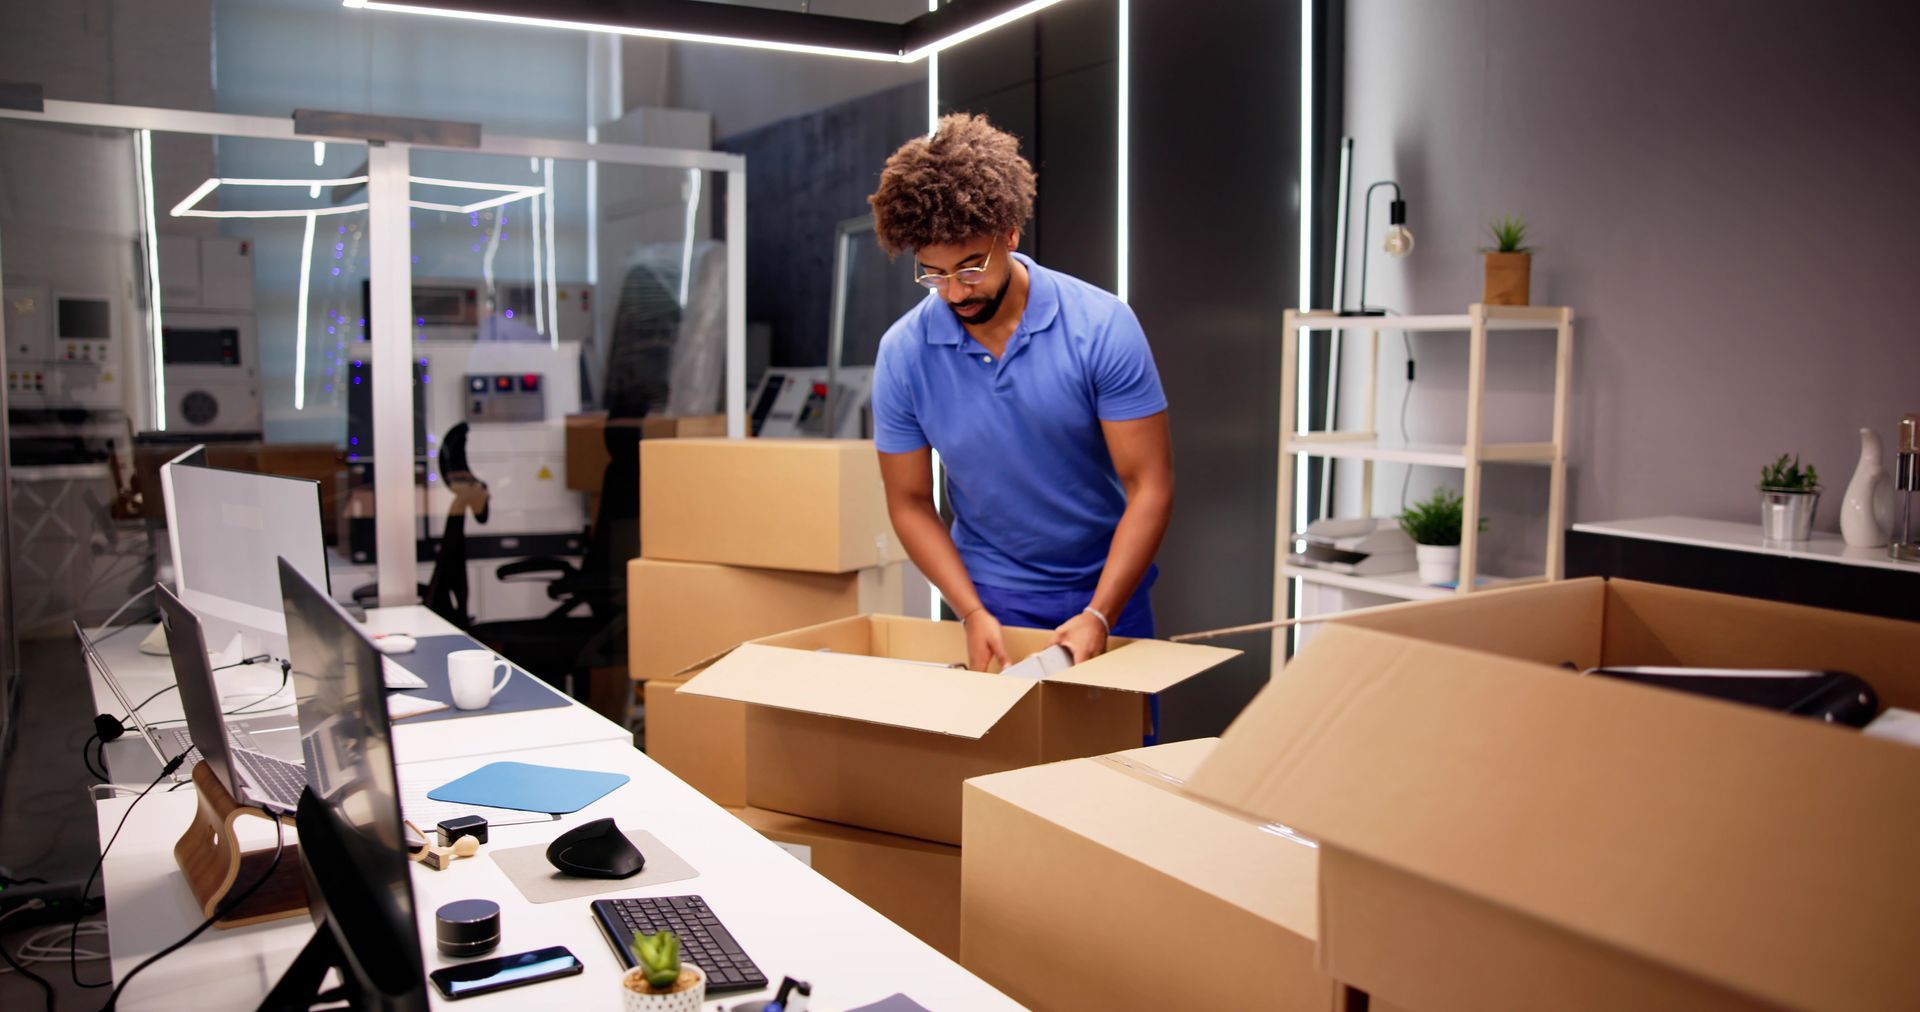 A professional mover packing up office equipment